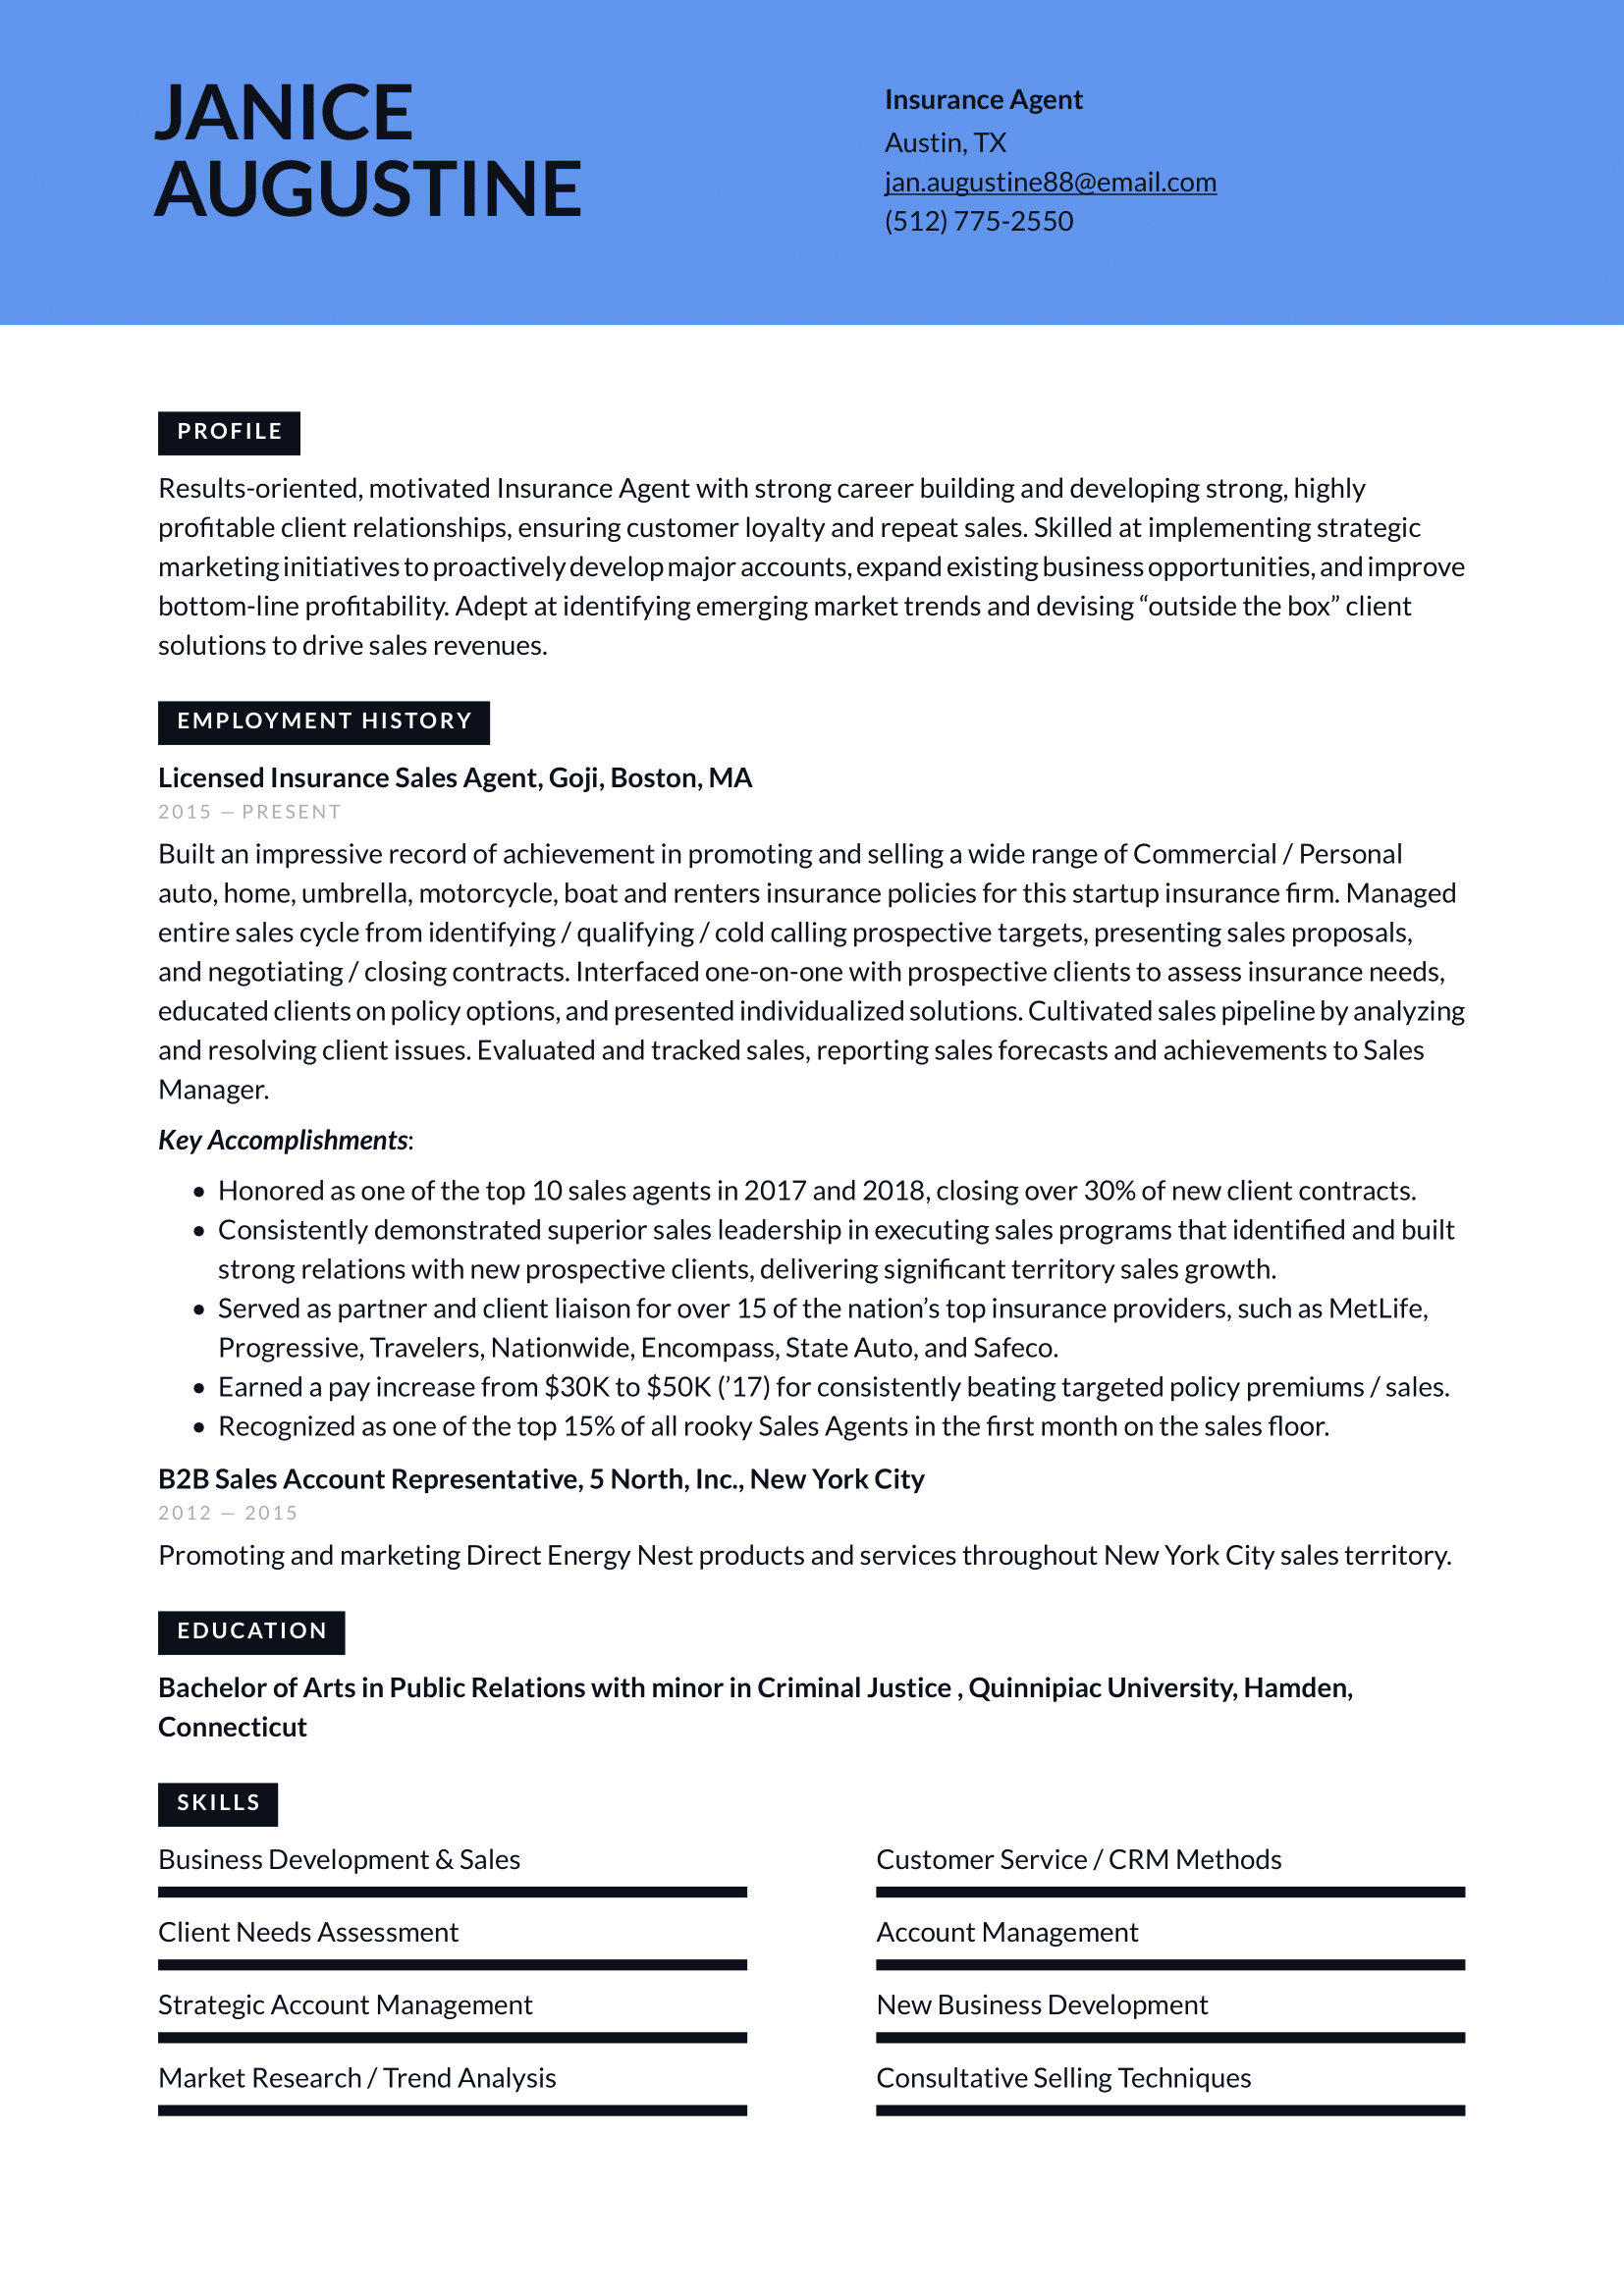 Insurance Agent Resume Example & Writing Guide